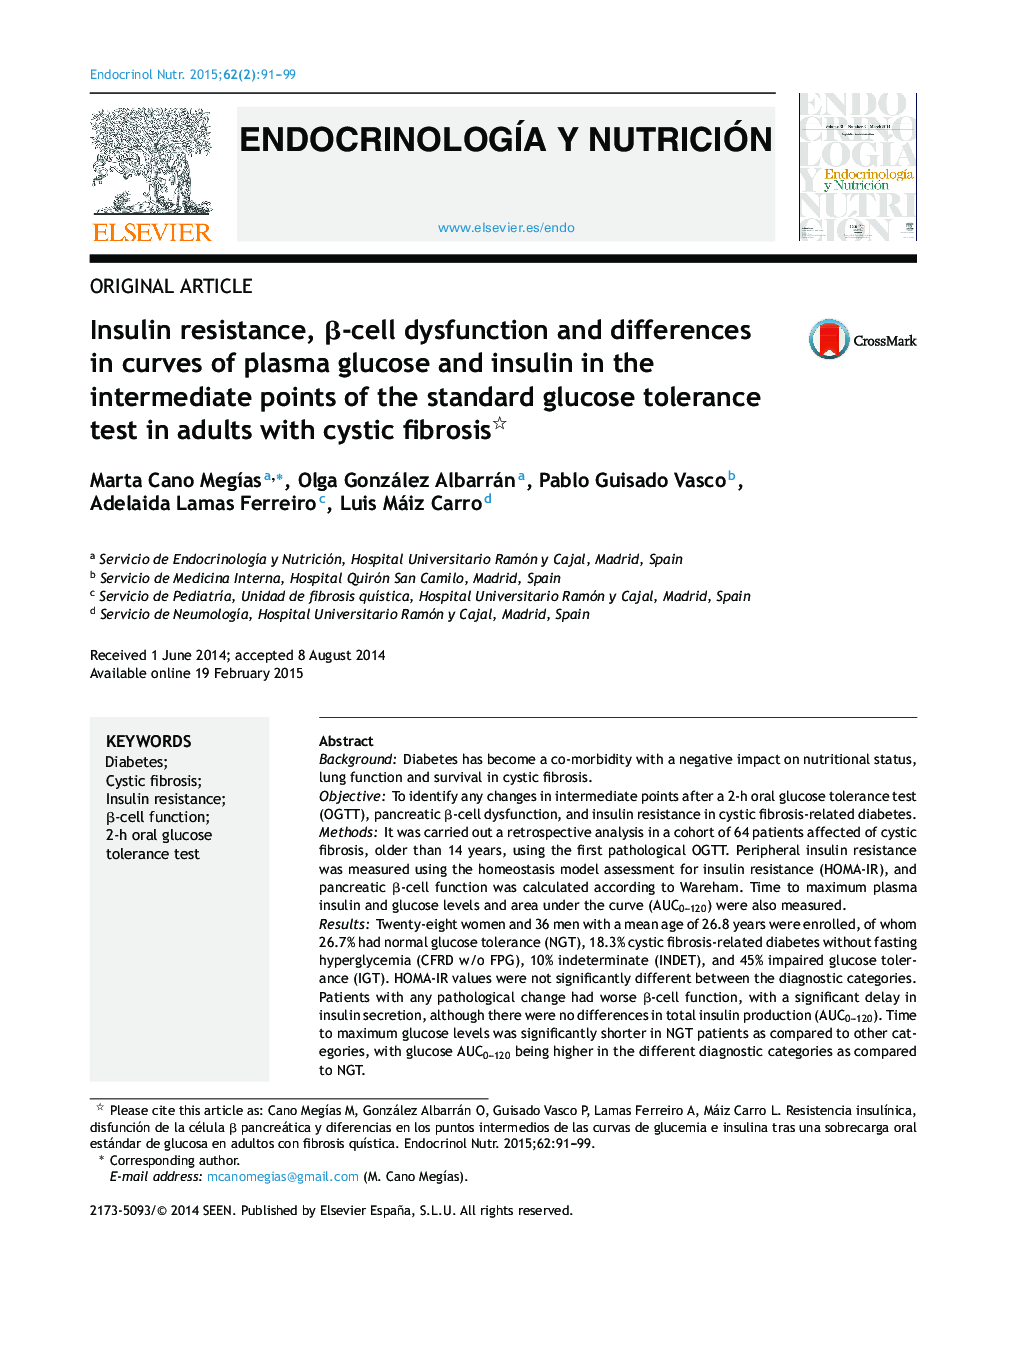 Insulin resistance, β-cell dysfunction and differences in curves of plasma glucose and insulin in the intermediate points of the standard glucose tolerance test in adults with cystic fibrosis 